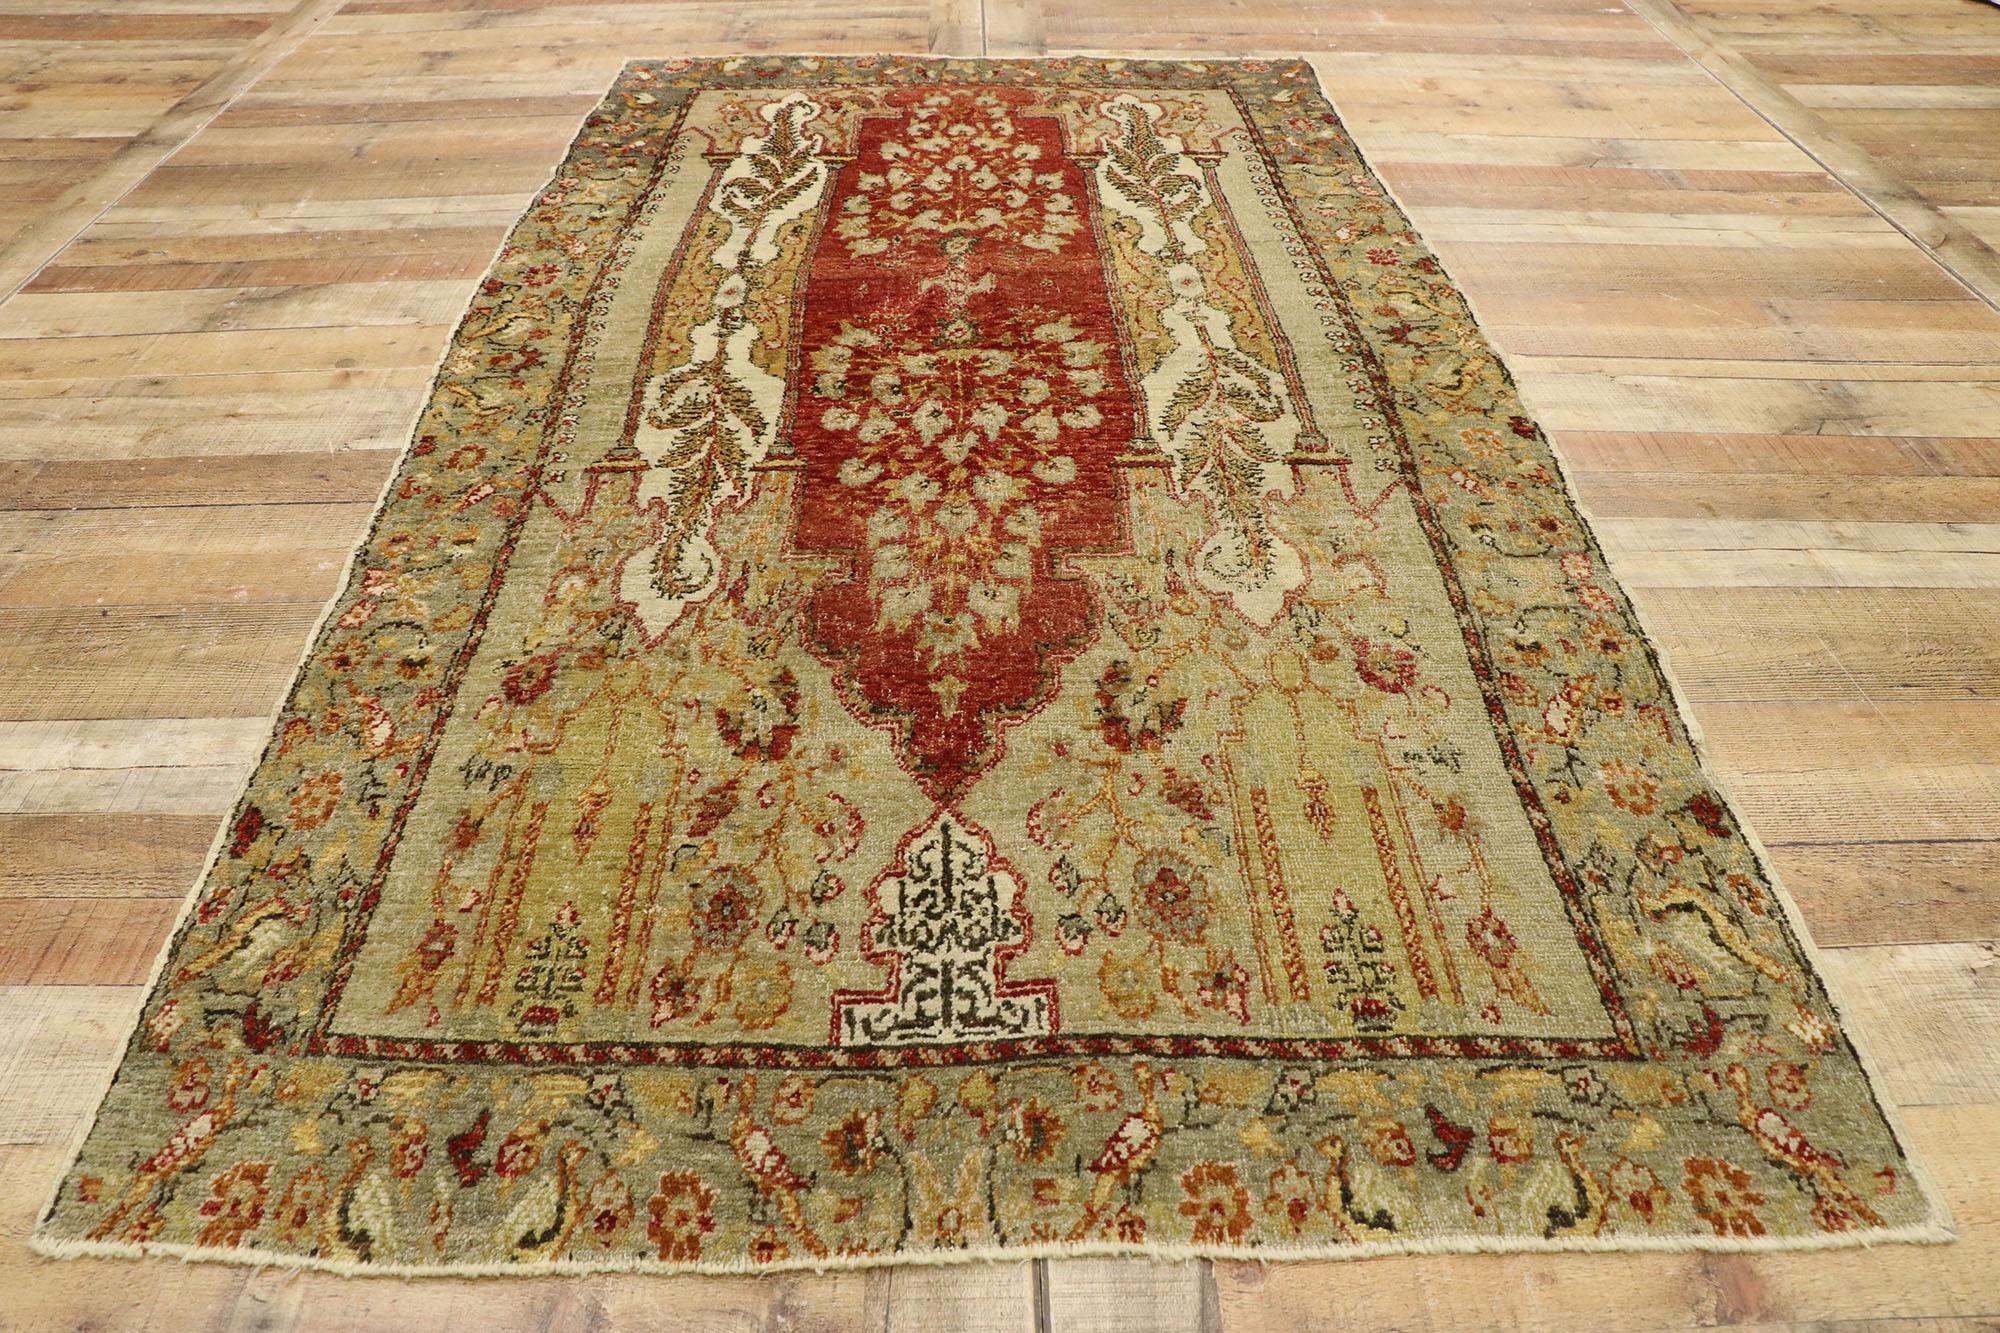 Vintage Turkish Oushak Prayer Rug with Rustic Tuscan Style For Sale 2